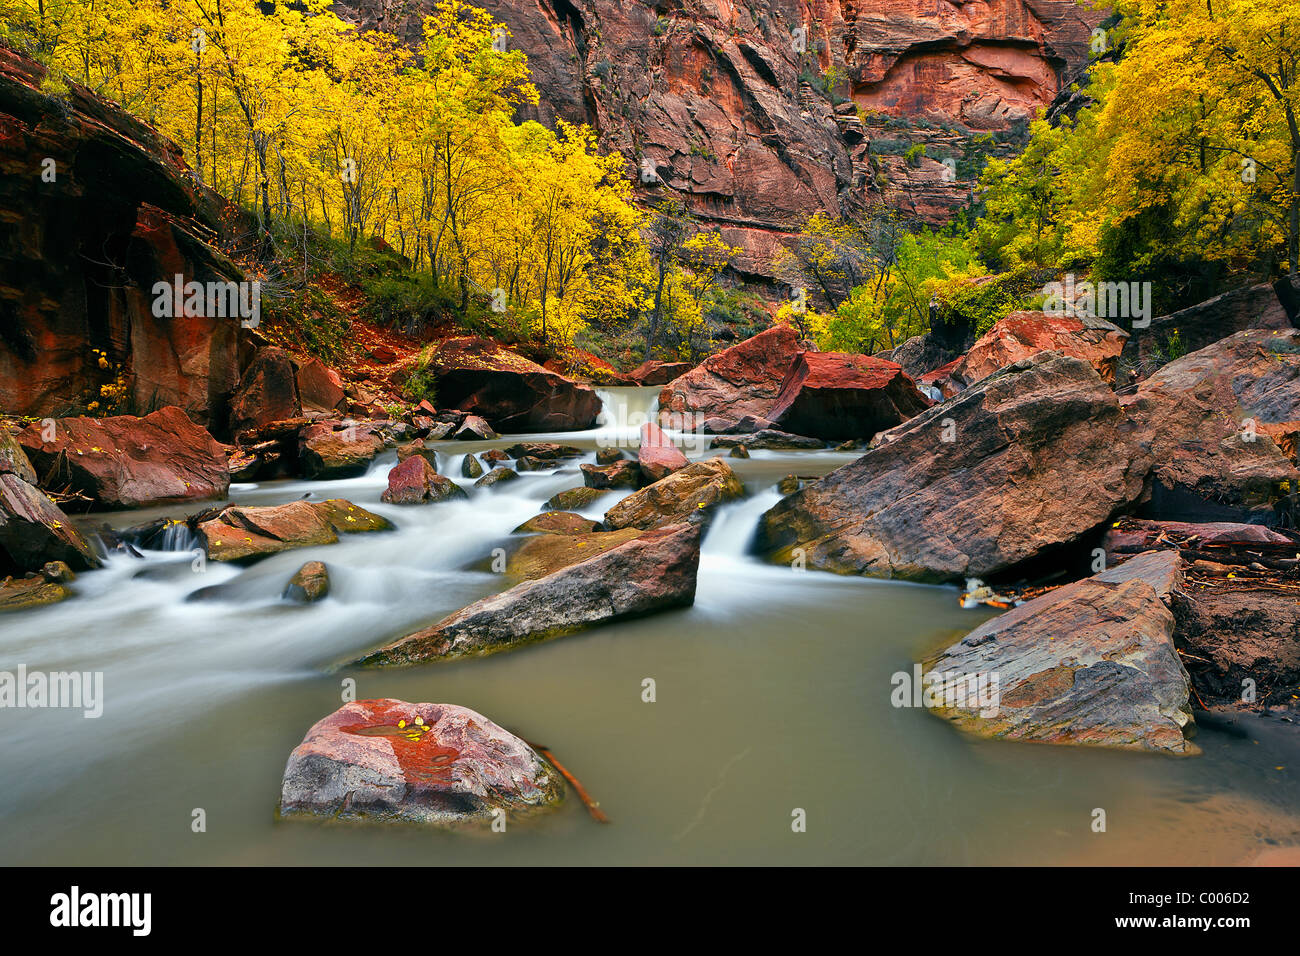 The Virgin River flows past cottonwoods in Zion Canyon, Zion National Park, Utah, USA. Stock Photo